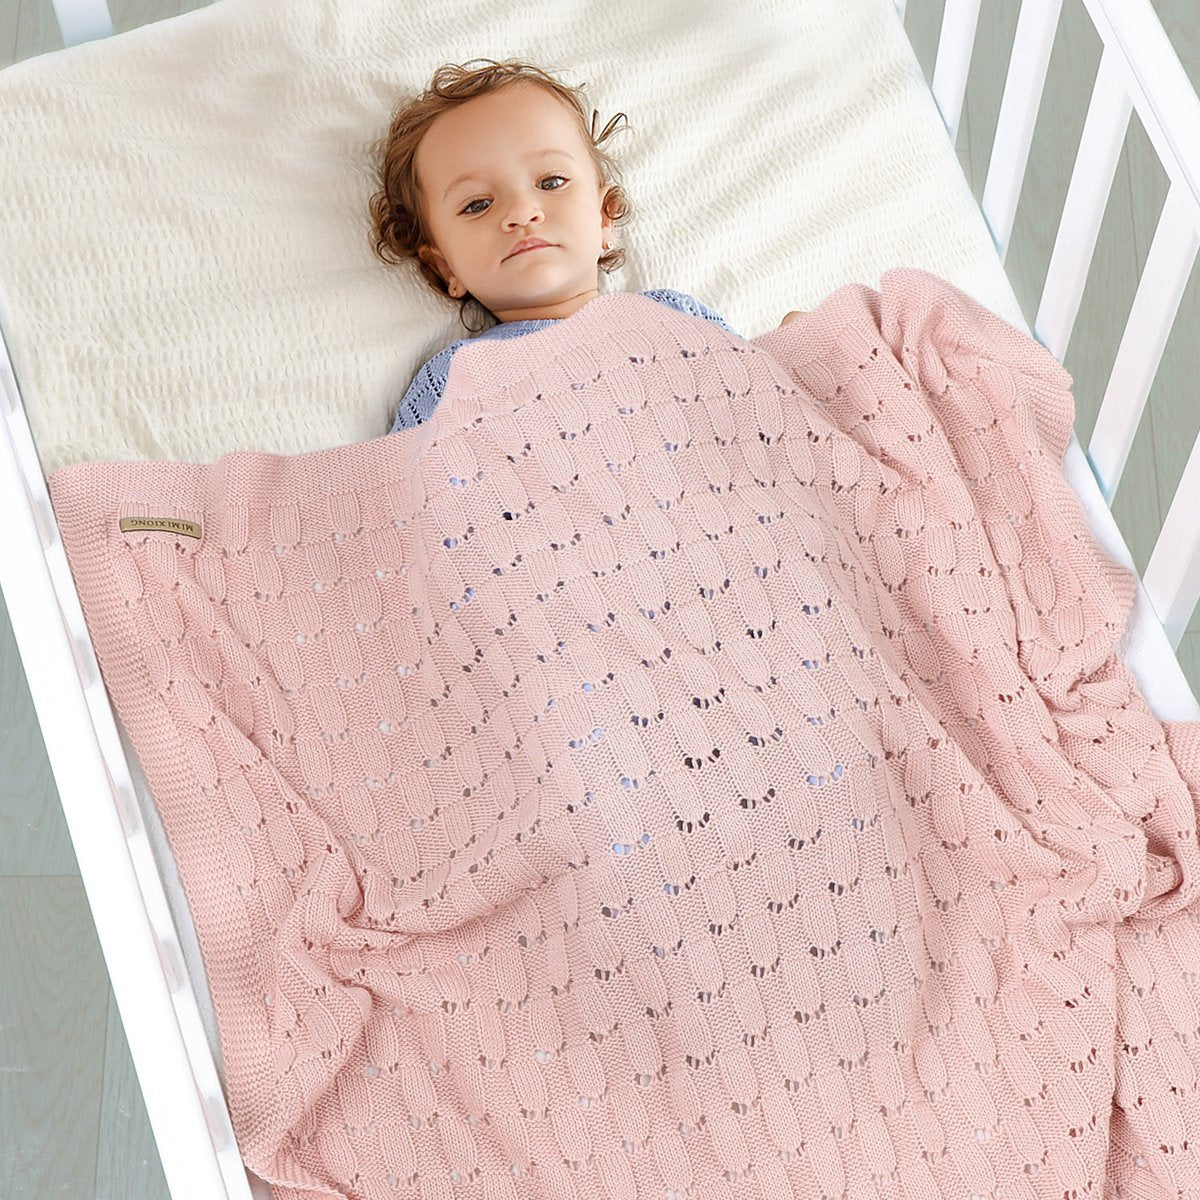 Hollow Multifunctional Cover Blanket For Infants Baby Clothes Wholesale Distributors